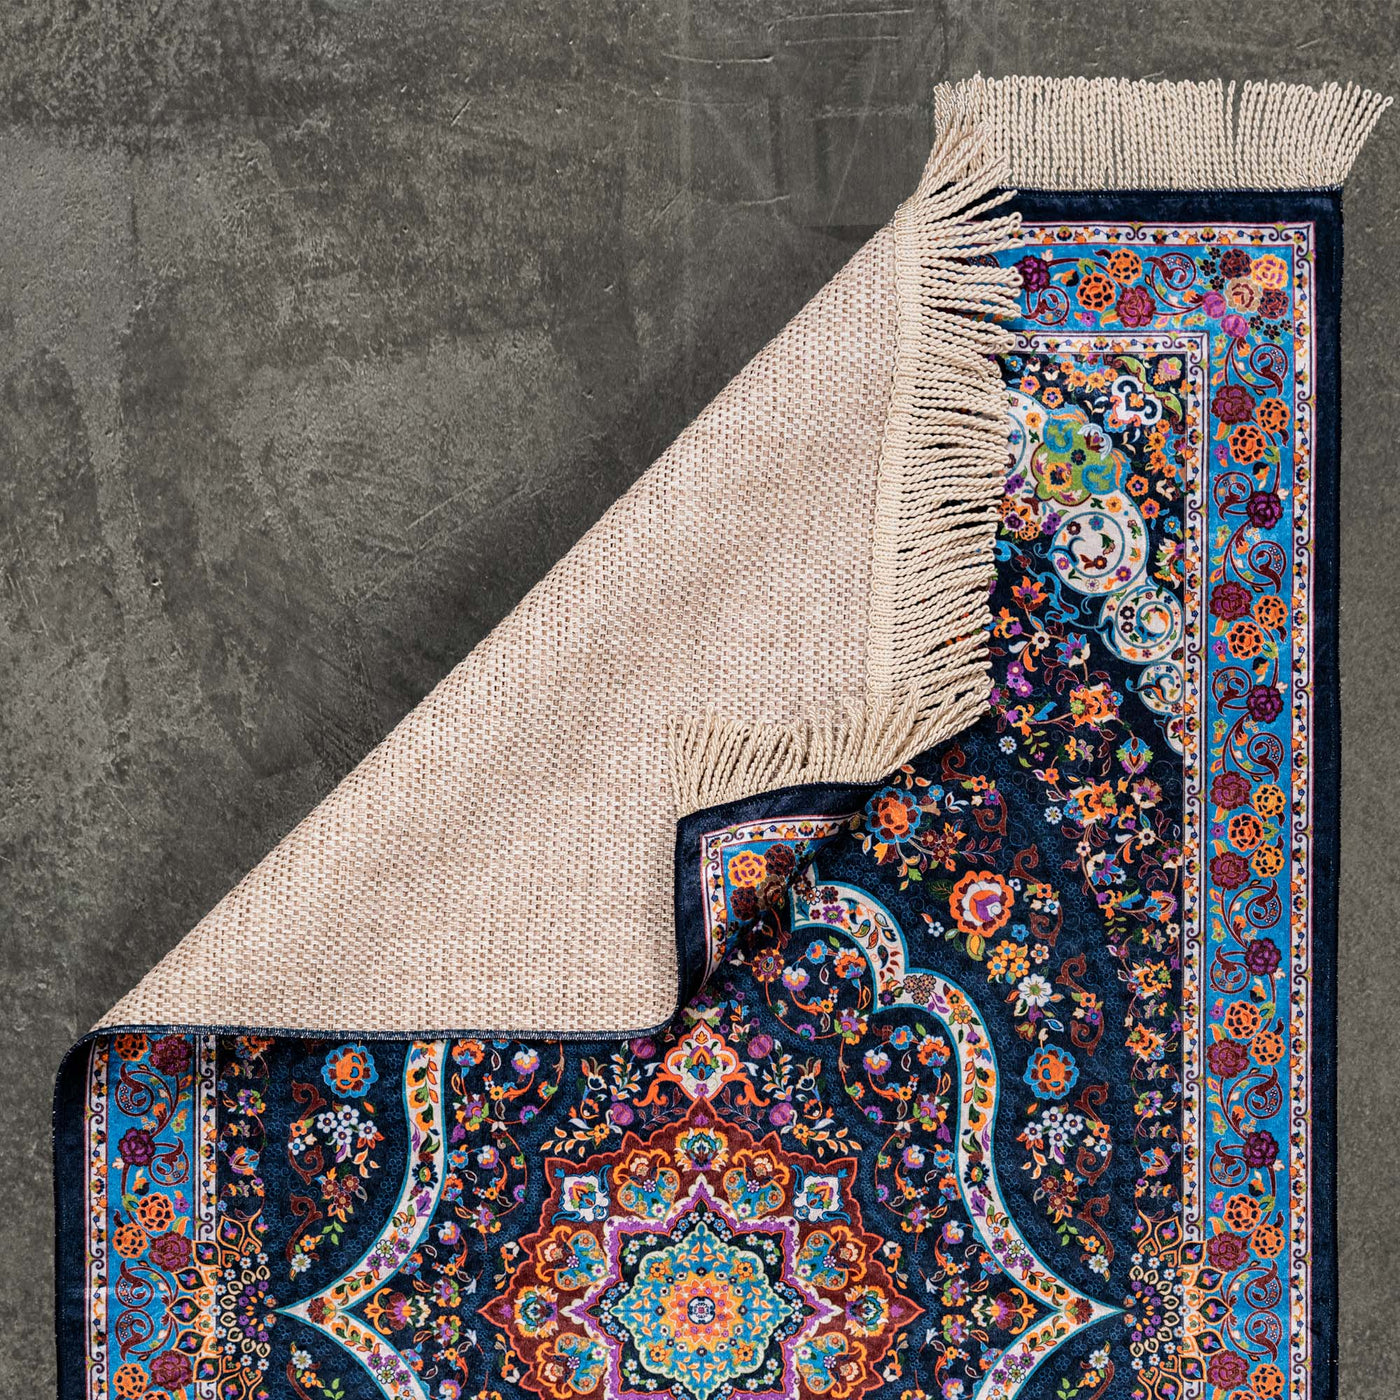 The Premium Tulip Prayer Rug has very beautiful detailed flowers looking pattern. The Premium Tulip Prayer Rug is available in 3 different colors.